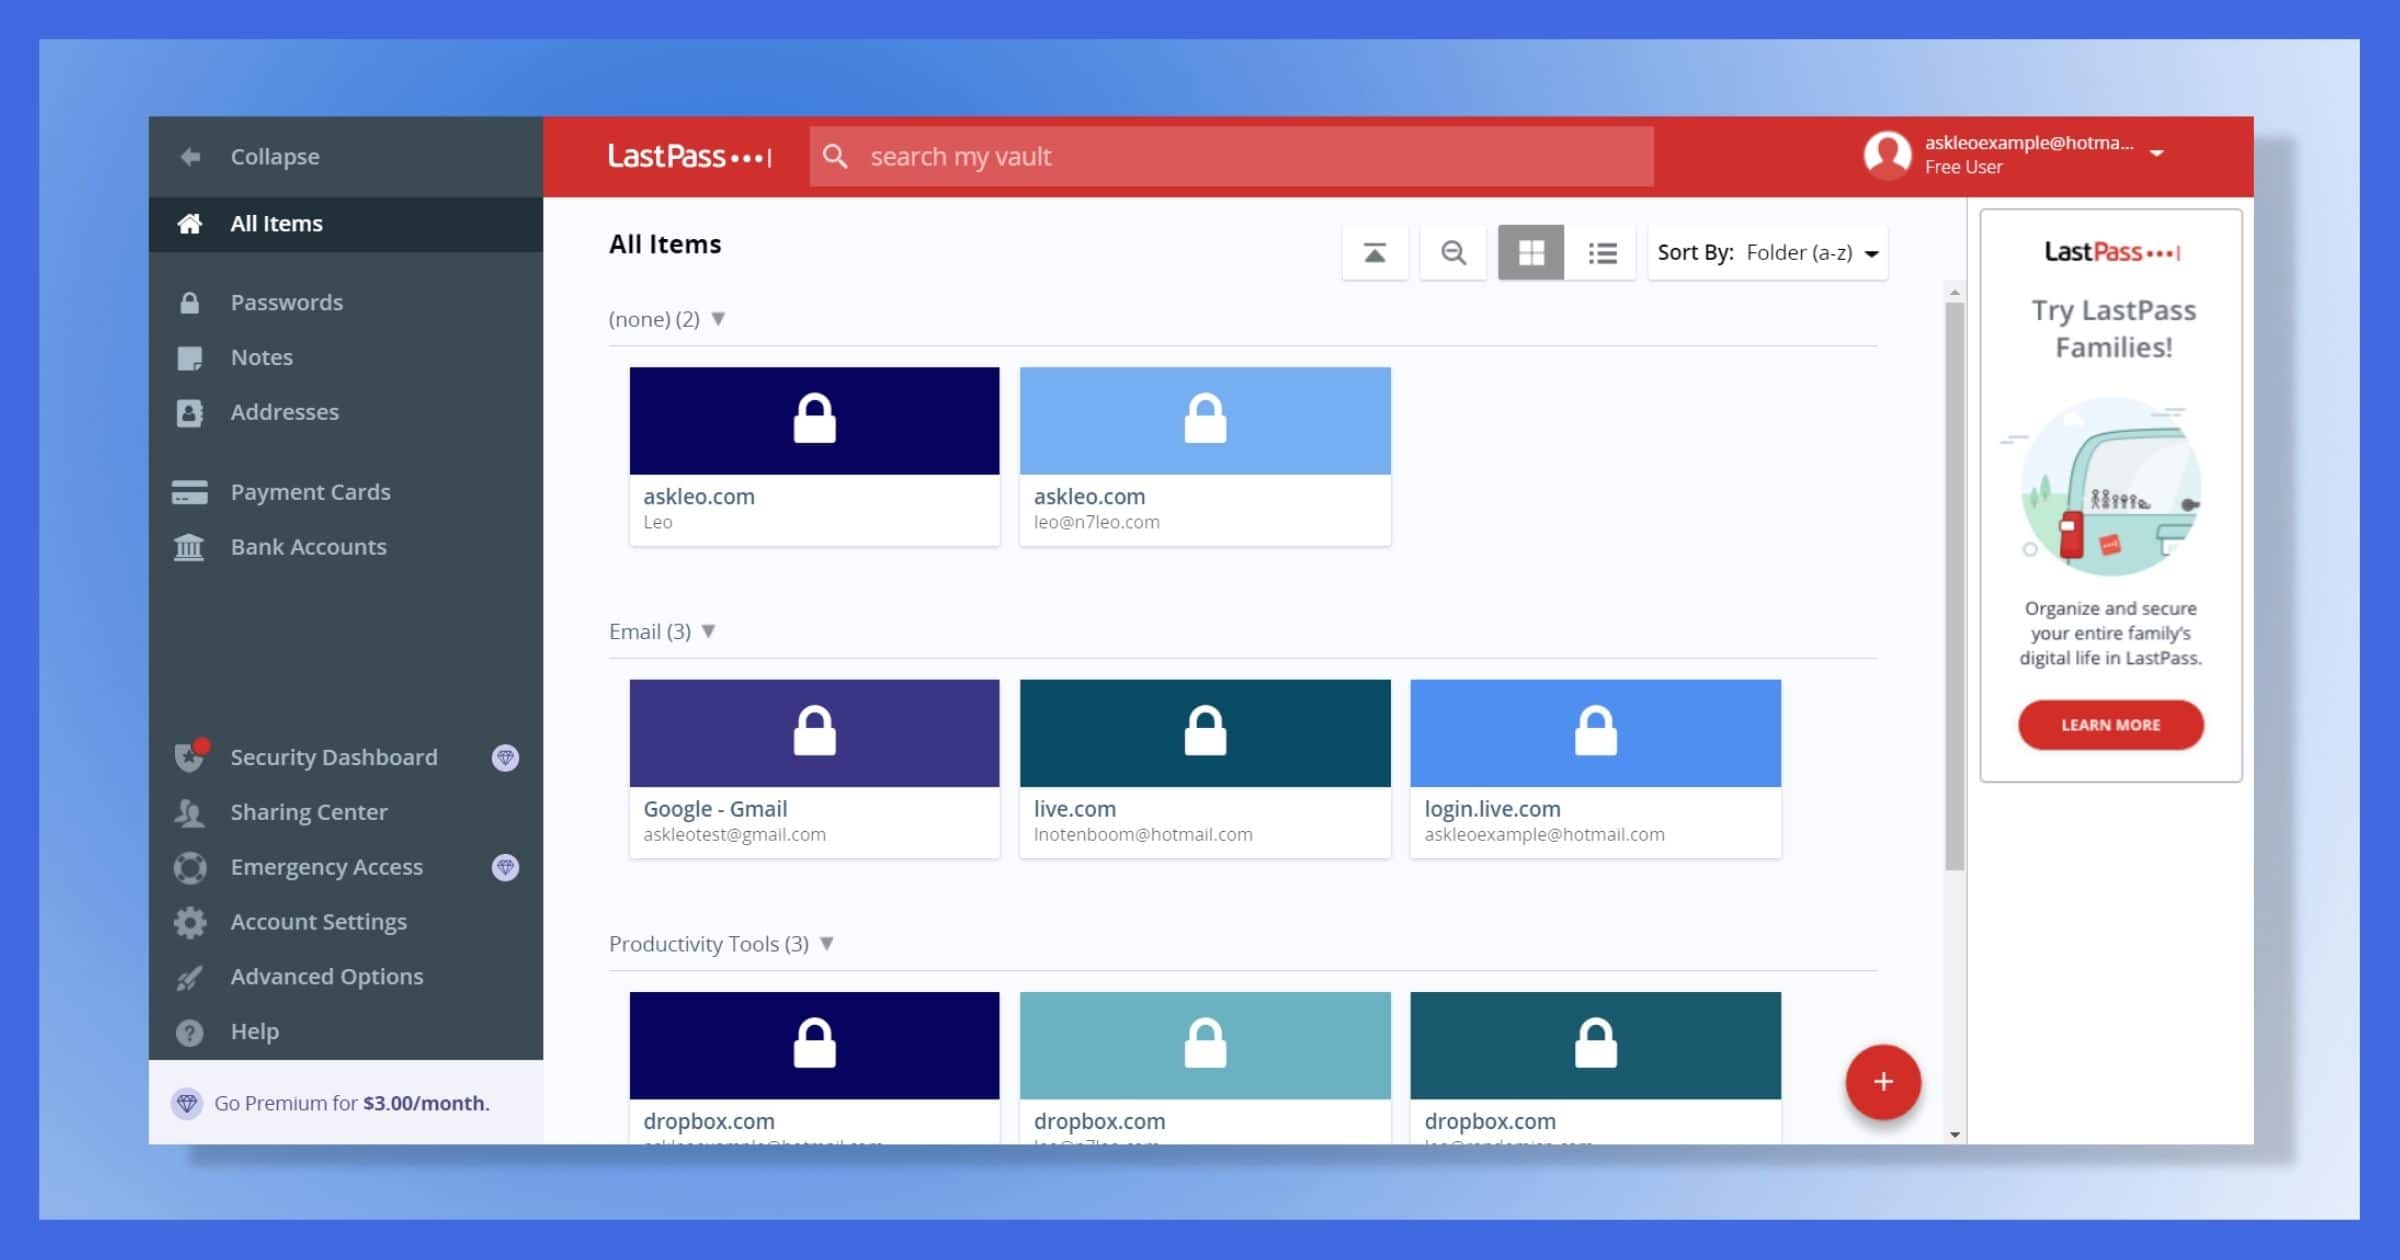 LastPass Password Manager 4.104.1 Crack free download 2022 [Latest]